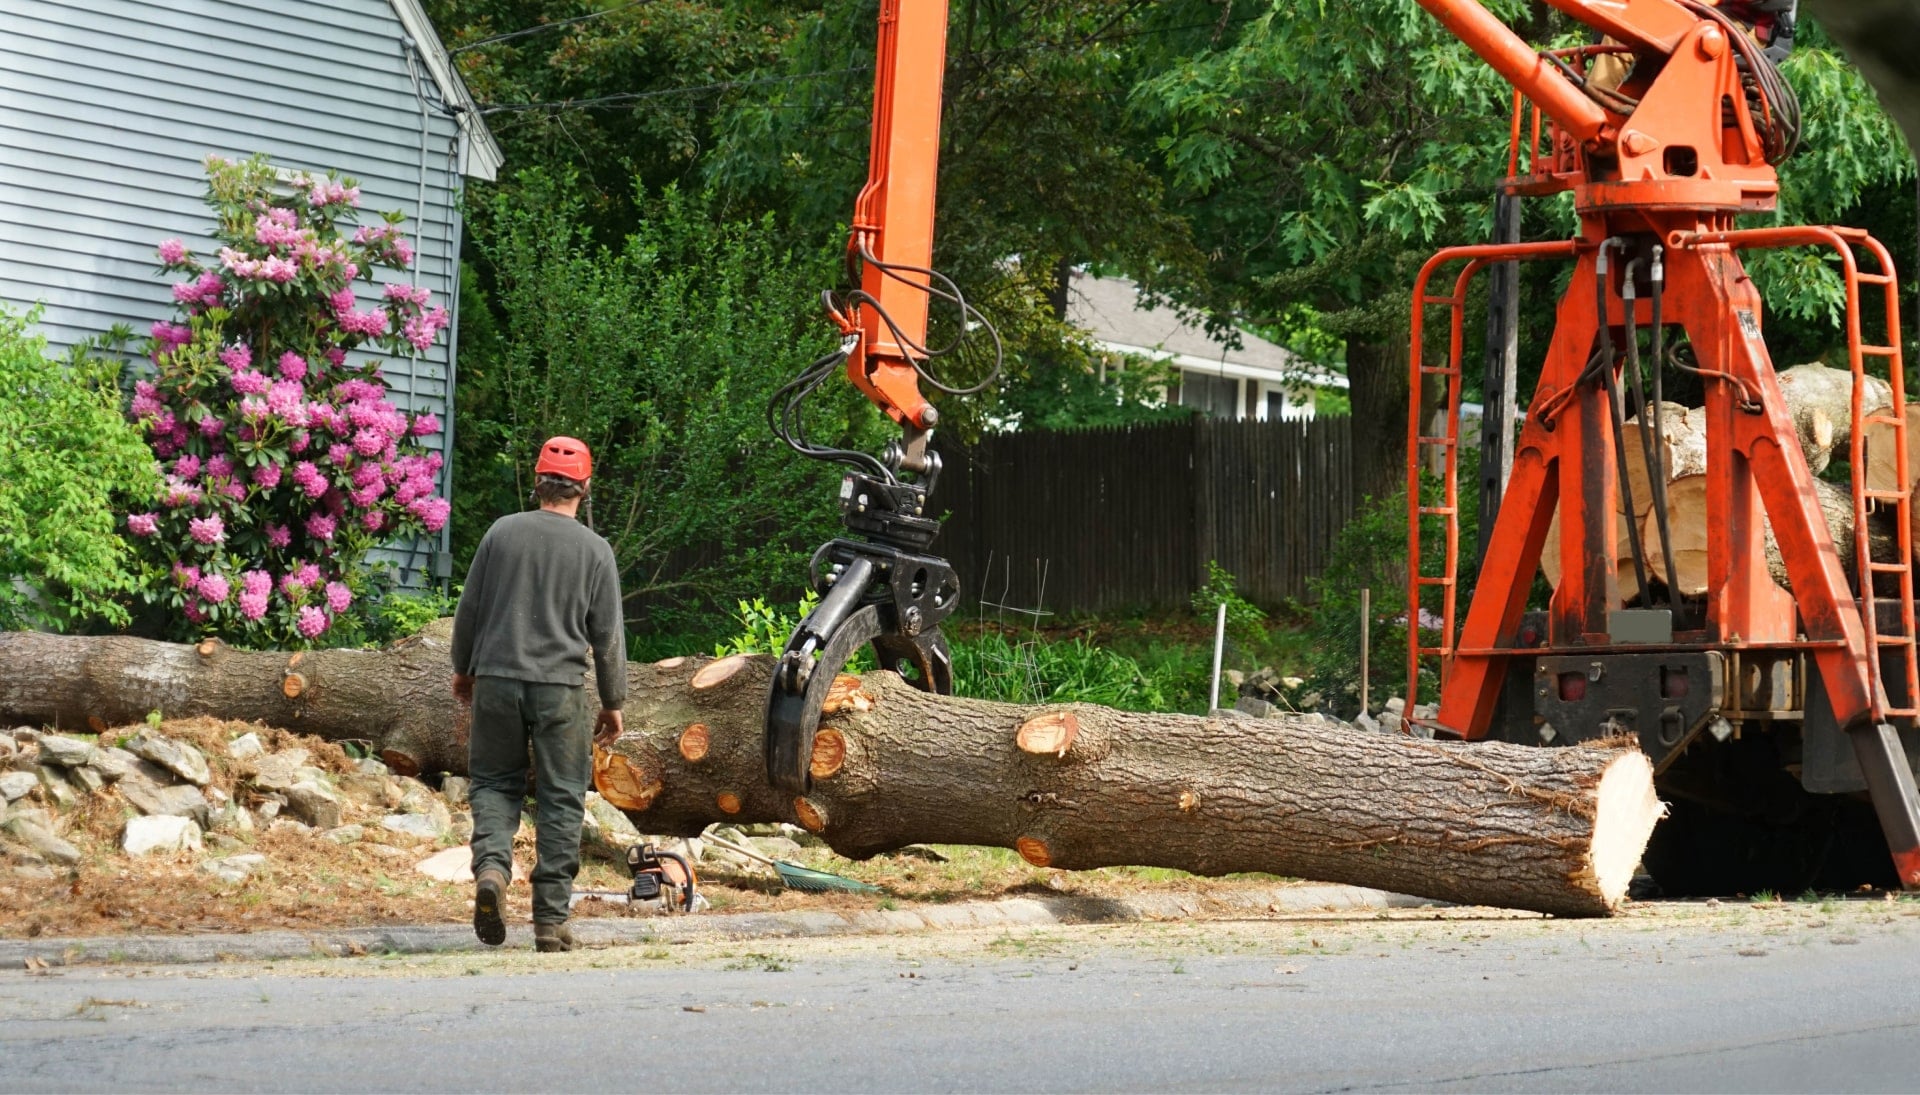 A tree removal service contractor works in Baton Rouge, Louisiana picking up tree